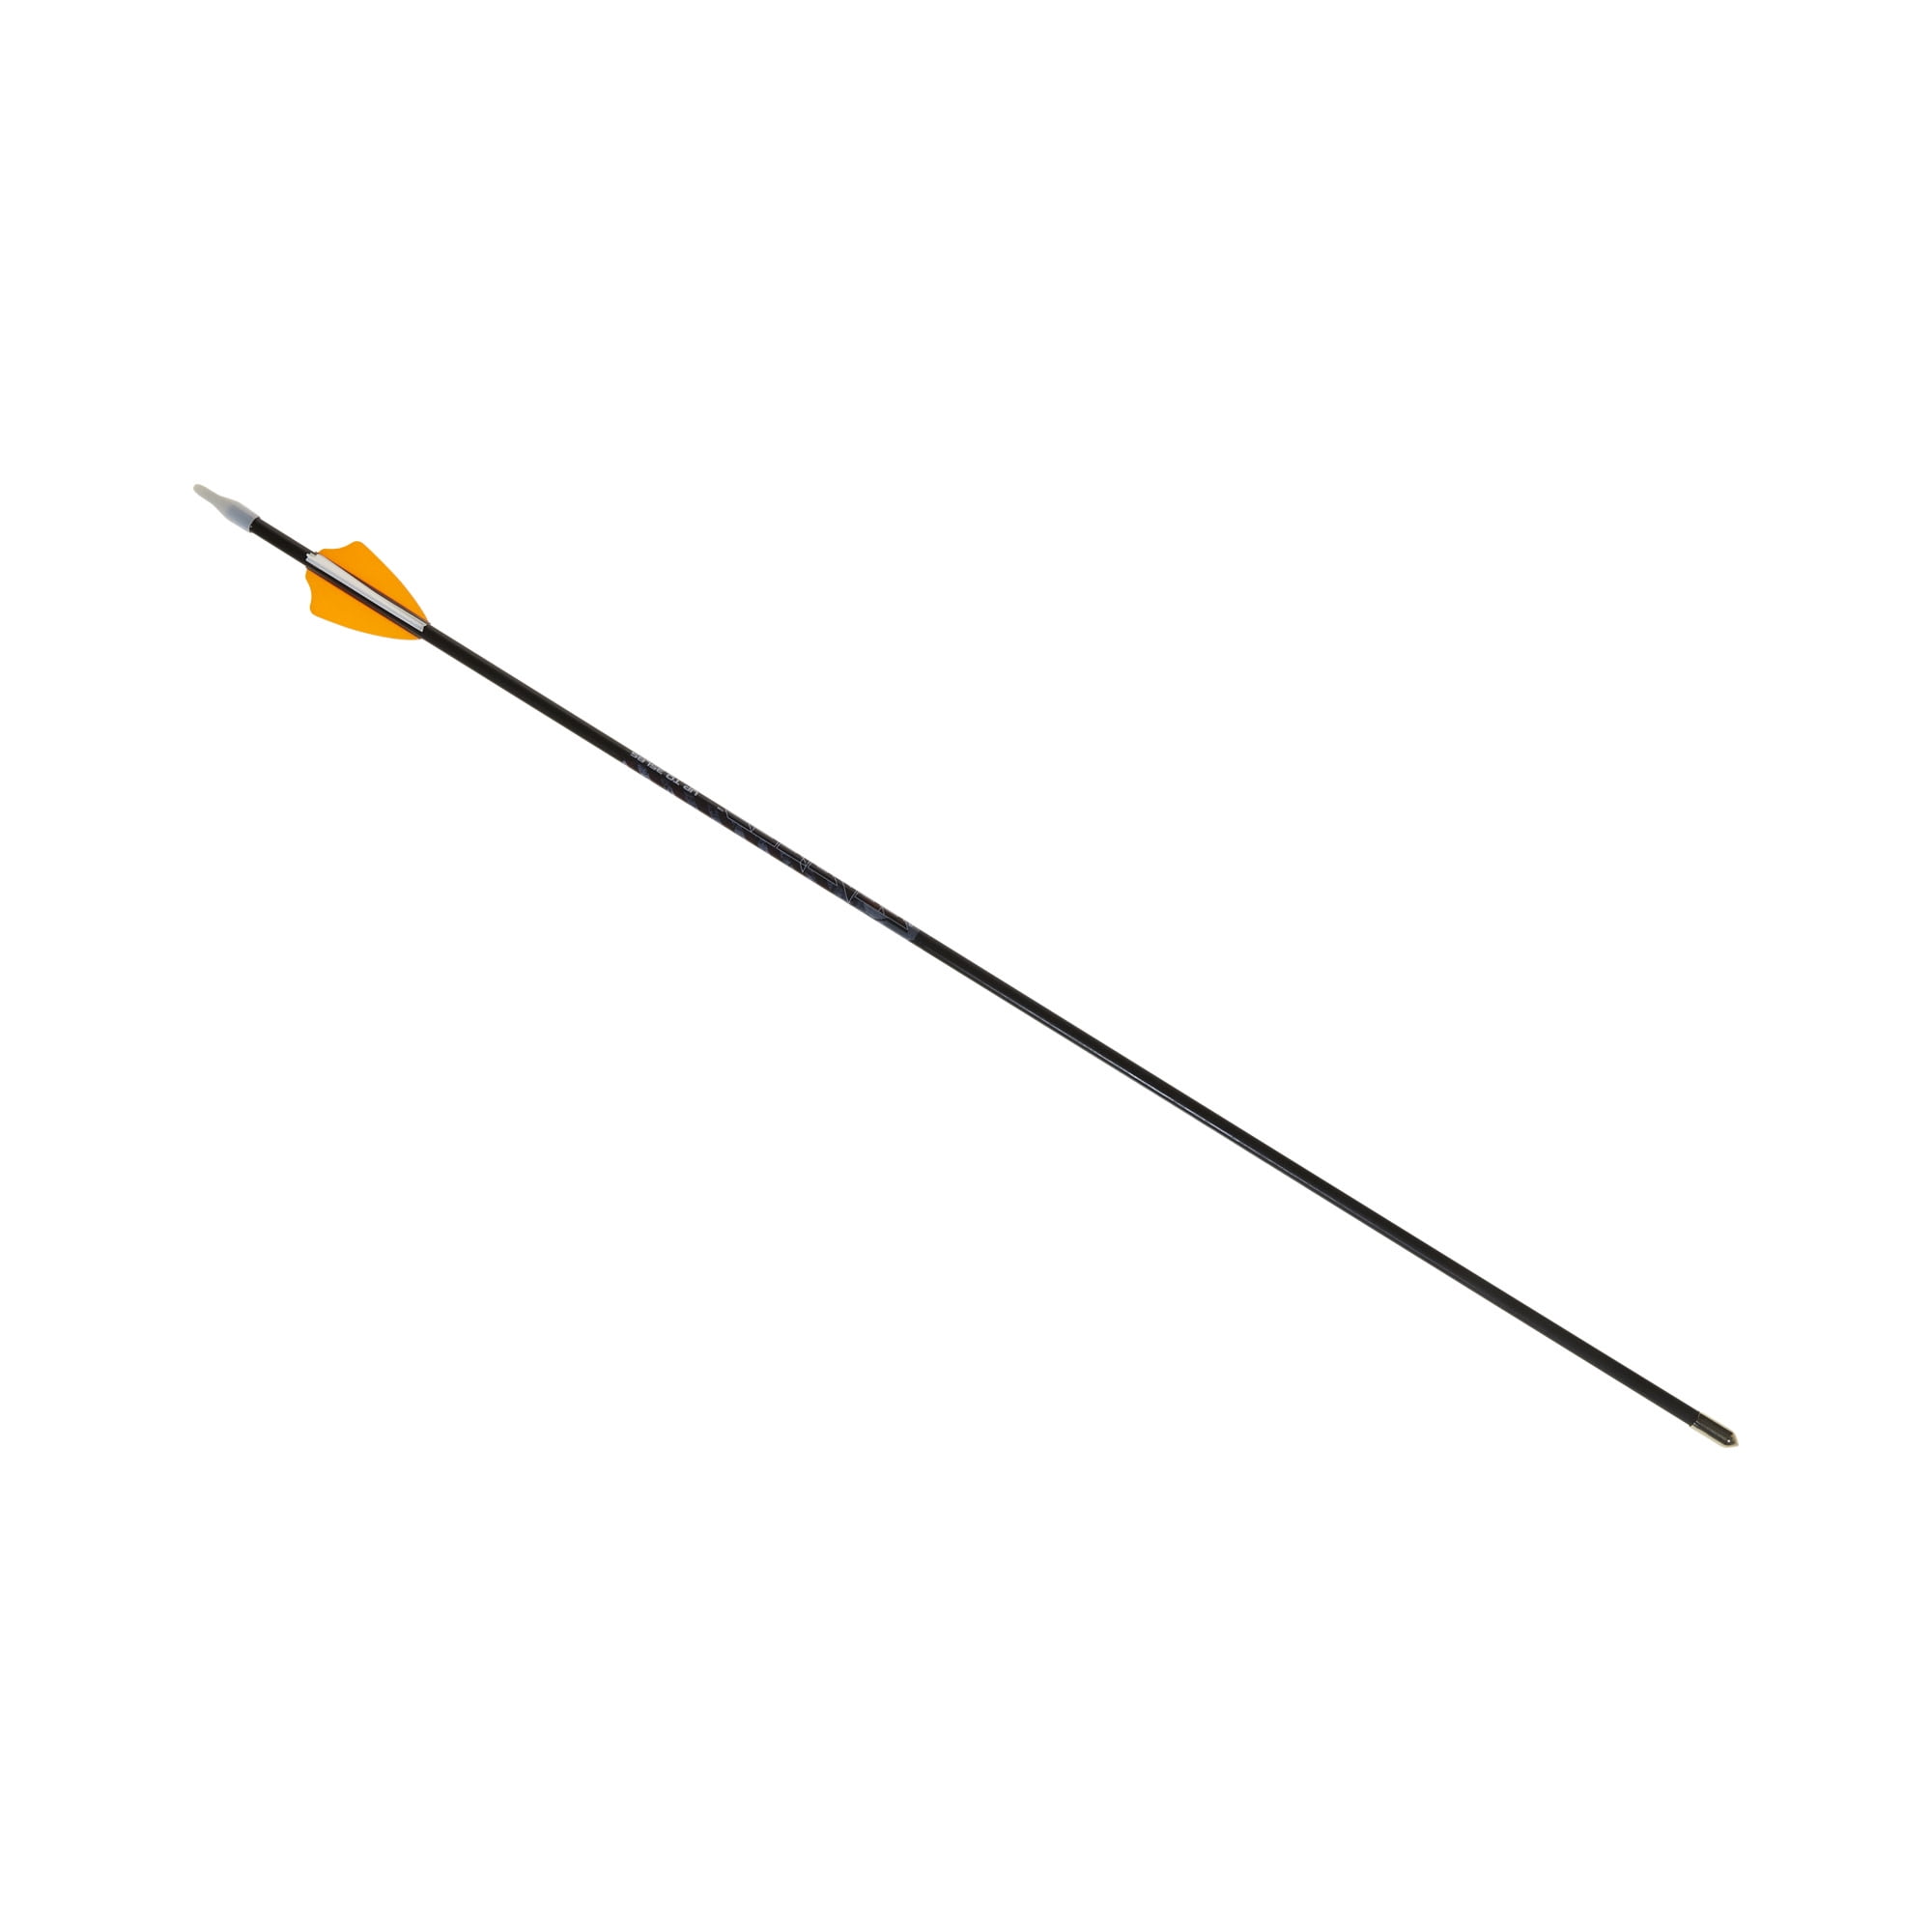 Genuine Petron Archery Fiberglass Tipped Wooden Arrows Pack of 3 